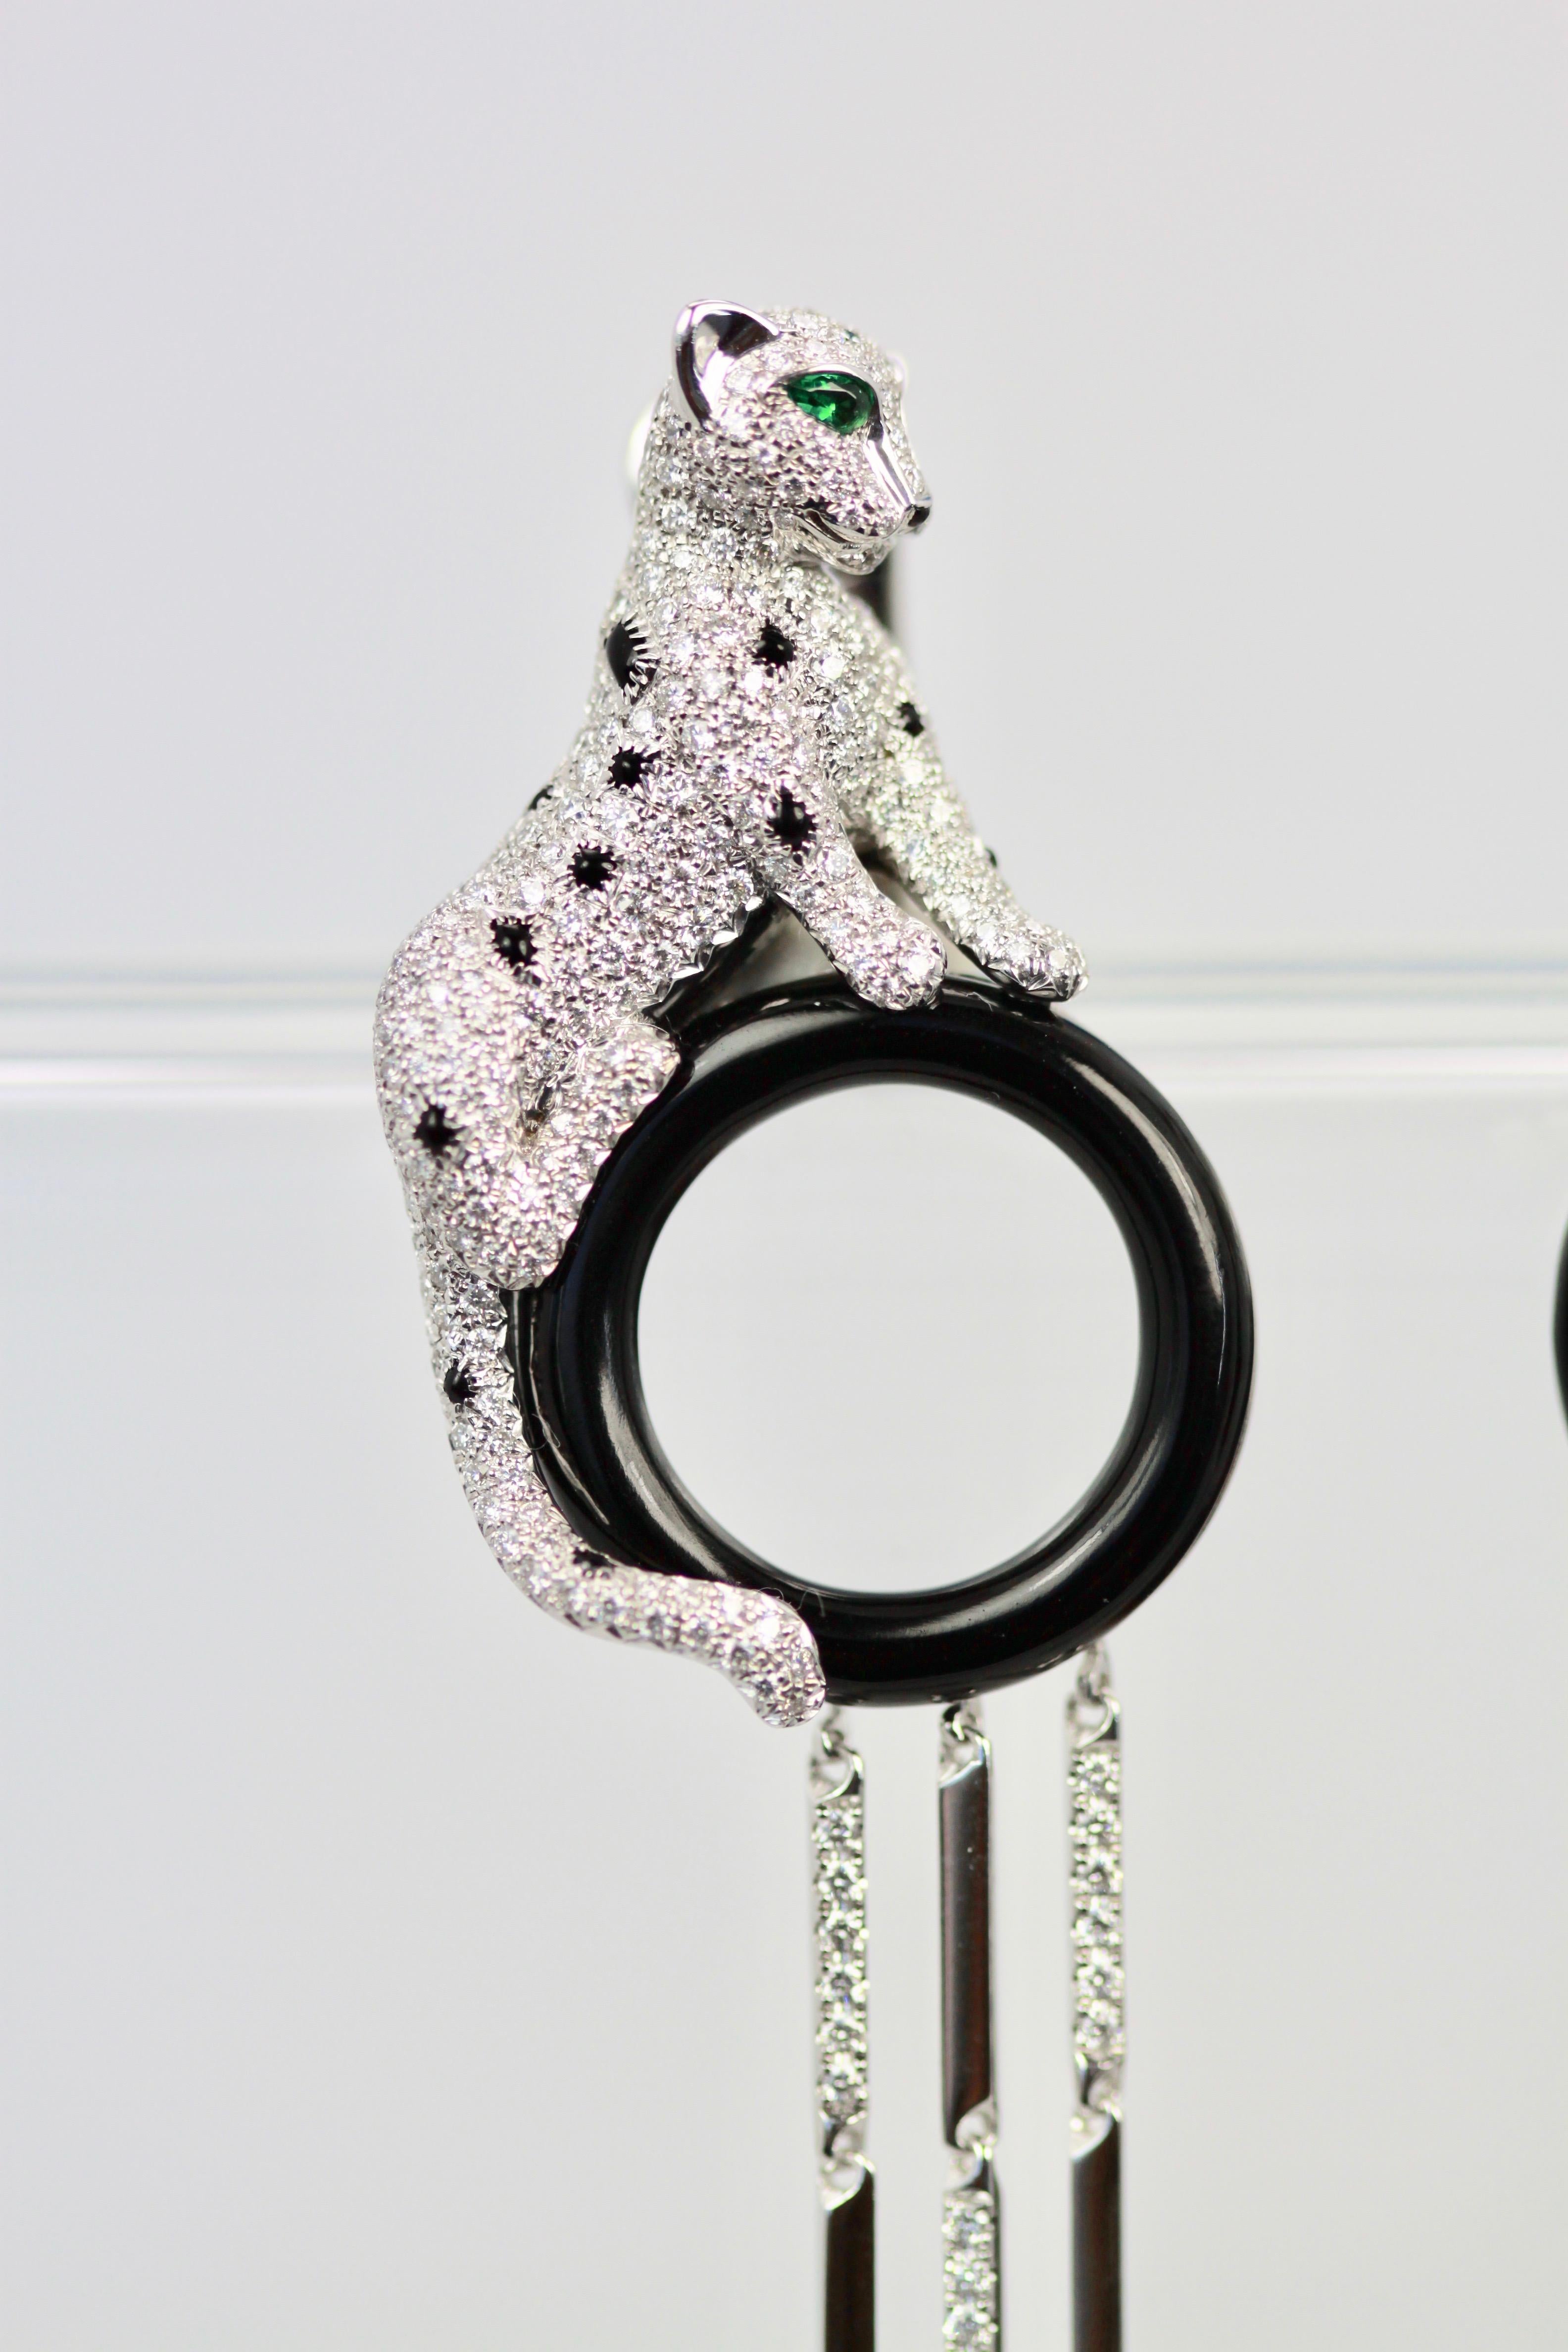 Cartier Diamond Panthere Earrings with Onyx and Emeralds 18K 4